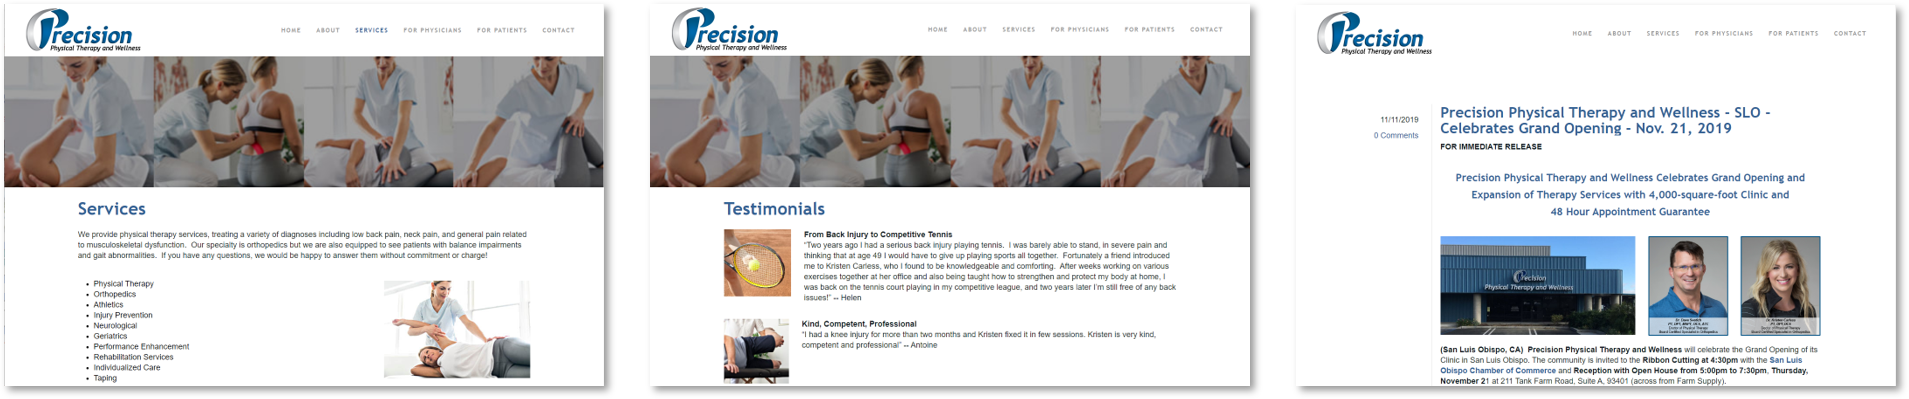 Nicolette A Munoz Consulting - Precision Physical Therapy SLO - Website